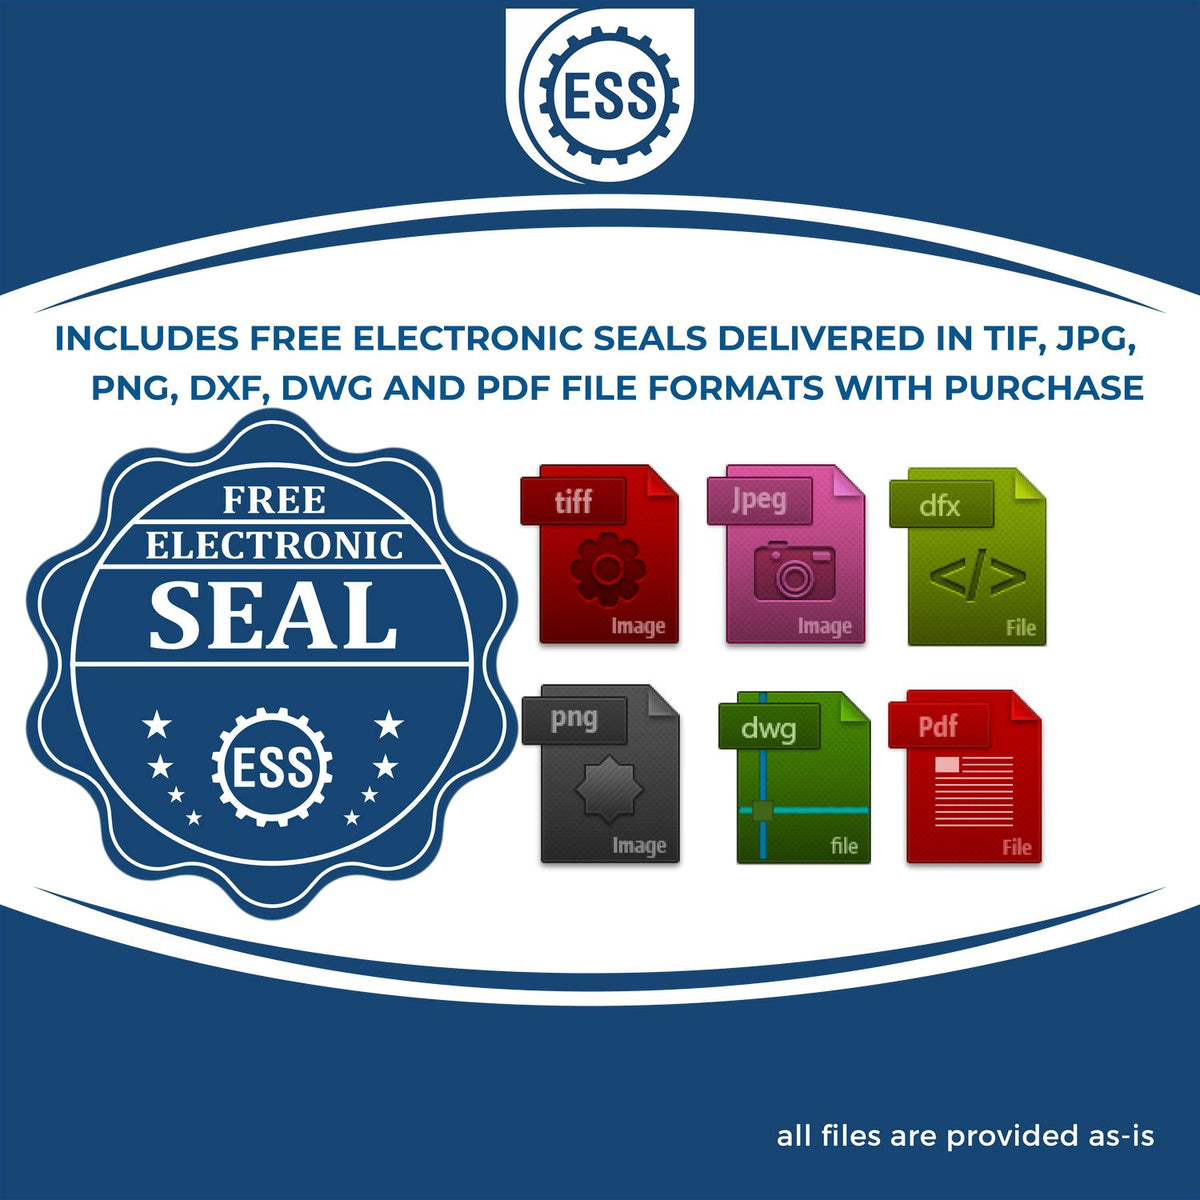 An infographic for the free electronic seal for the Gift Indiana Architect Seal illustrating the different file type icons such as DXF, DWG, TIF, JPG and PNG.